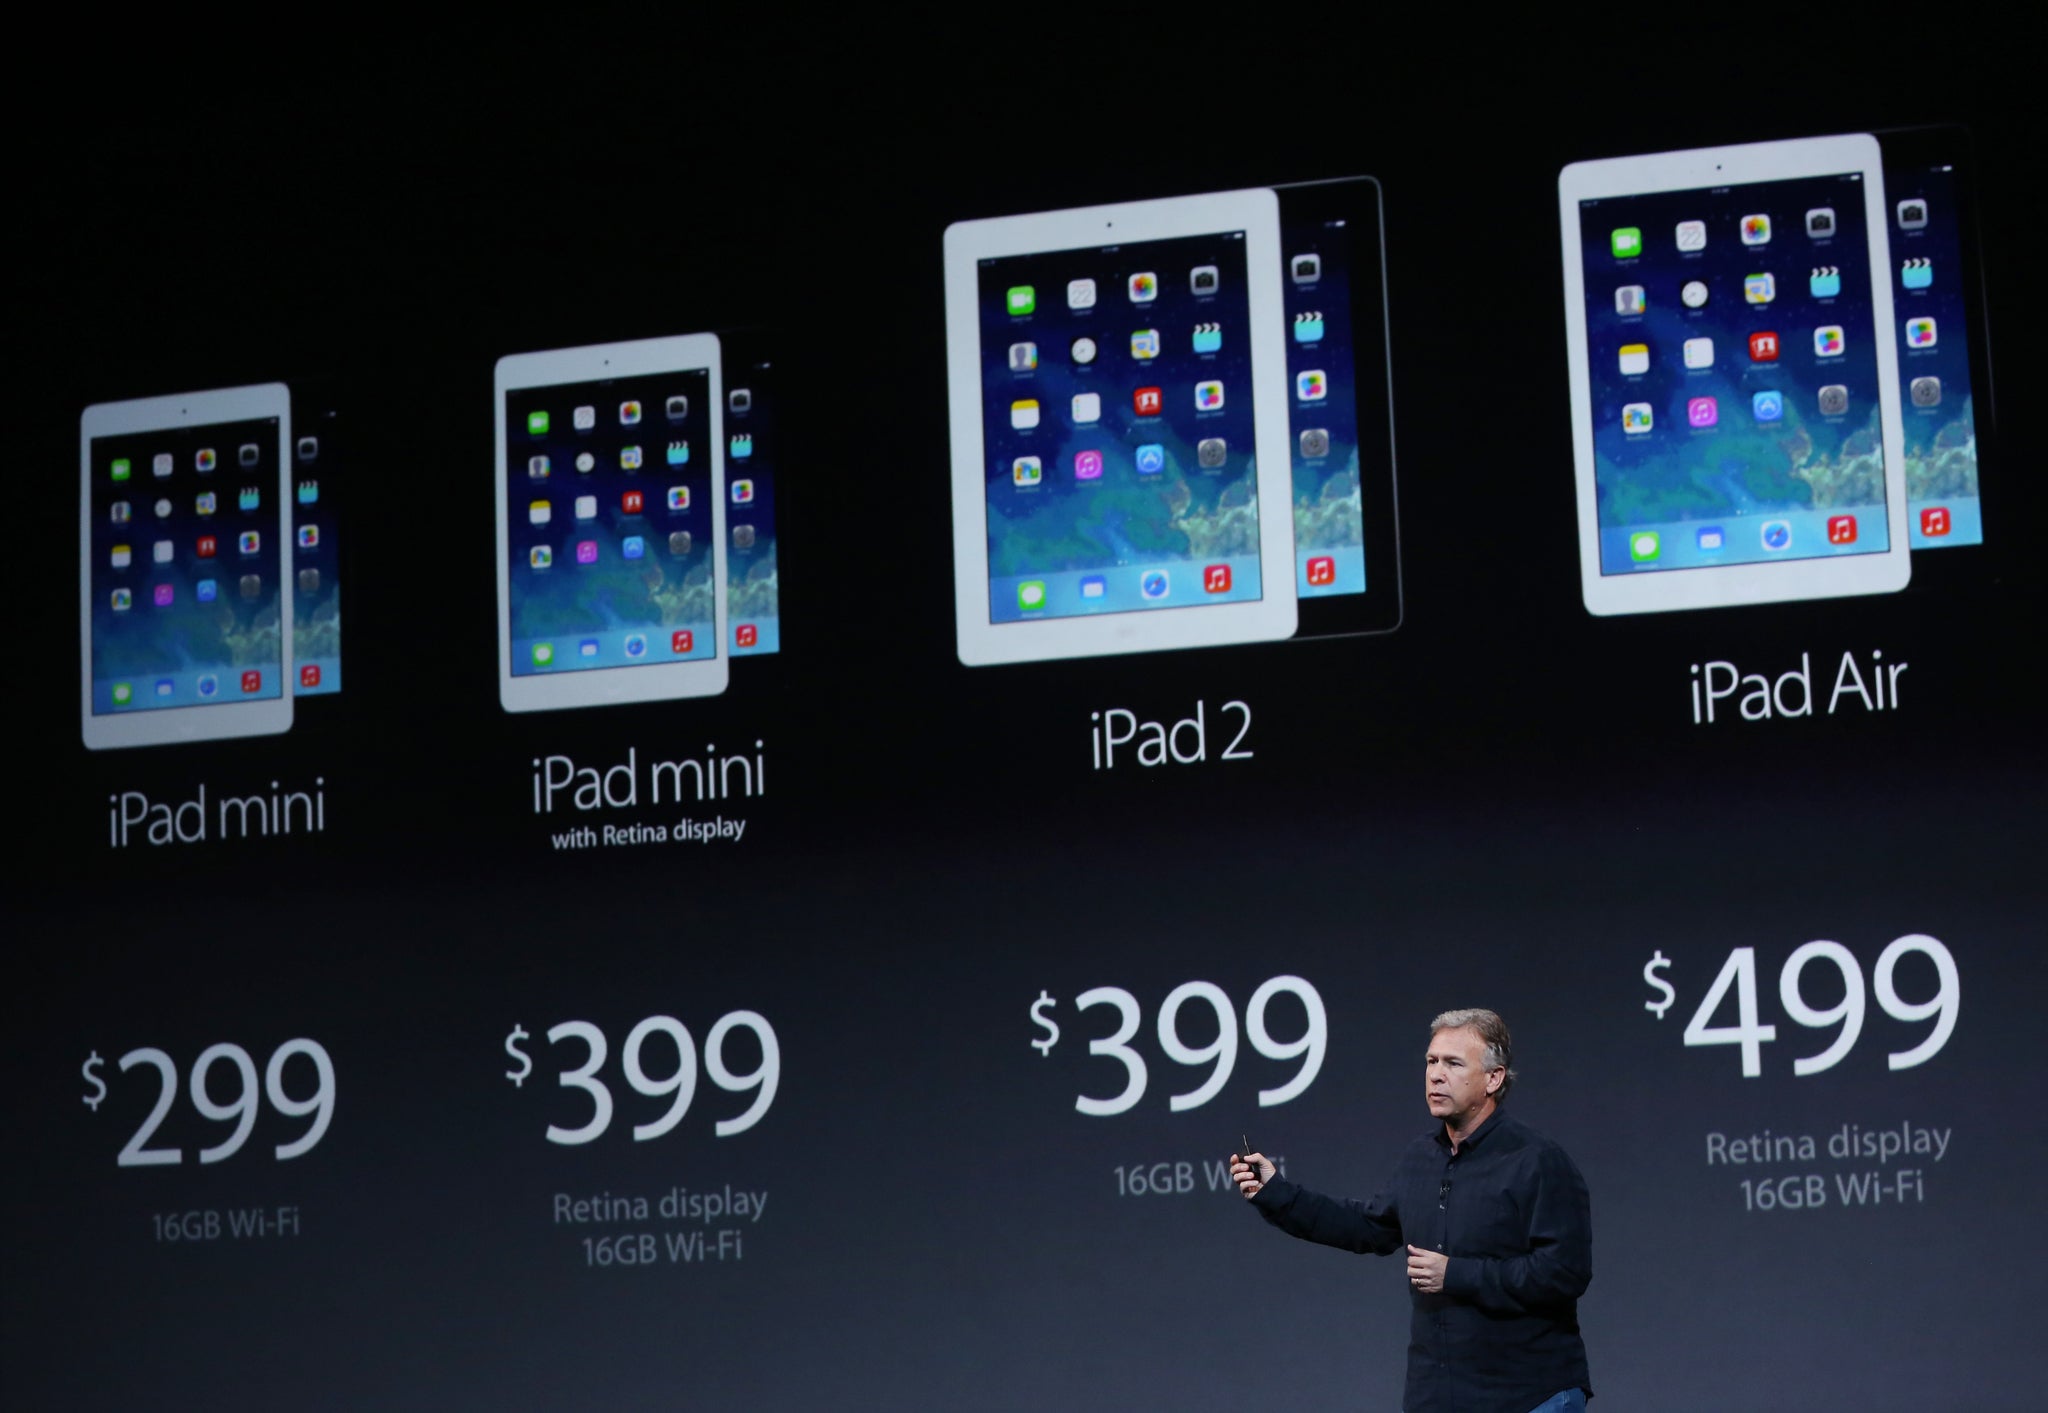 Phil Schiller onstage in San Francisco introducing the new pricing range for the iPad mini, iPad 2 and iPad Air.